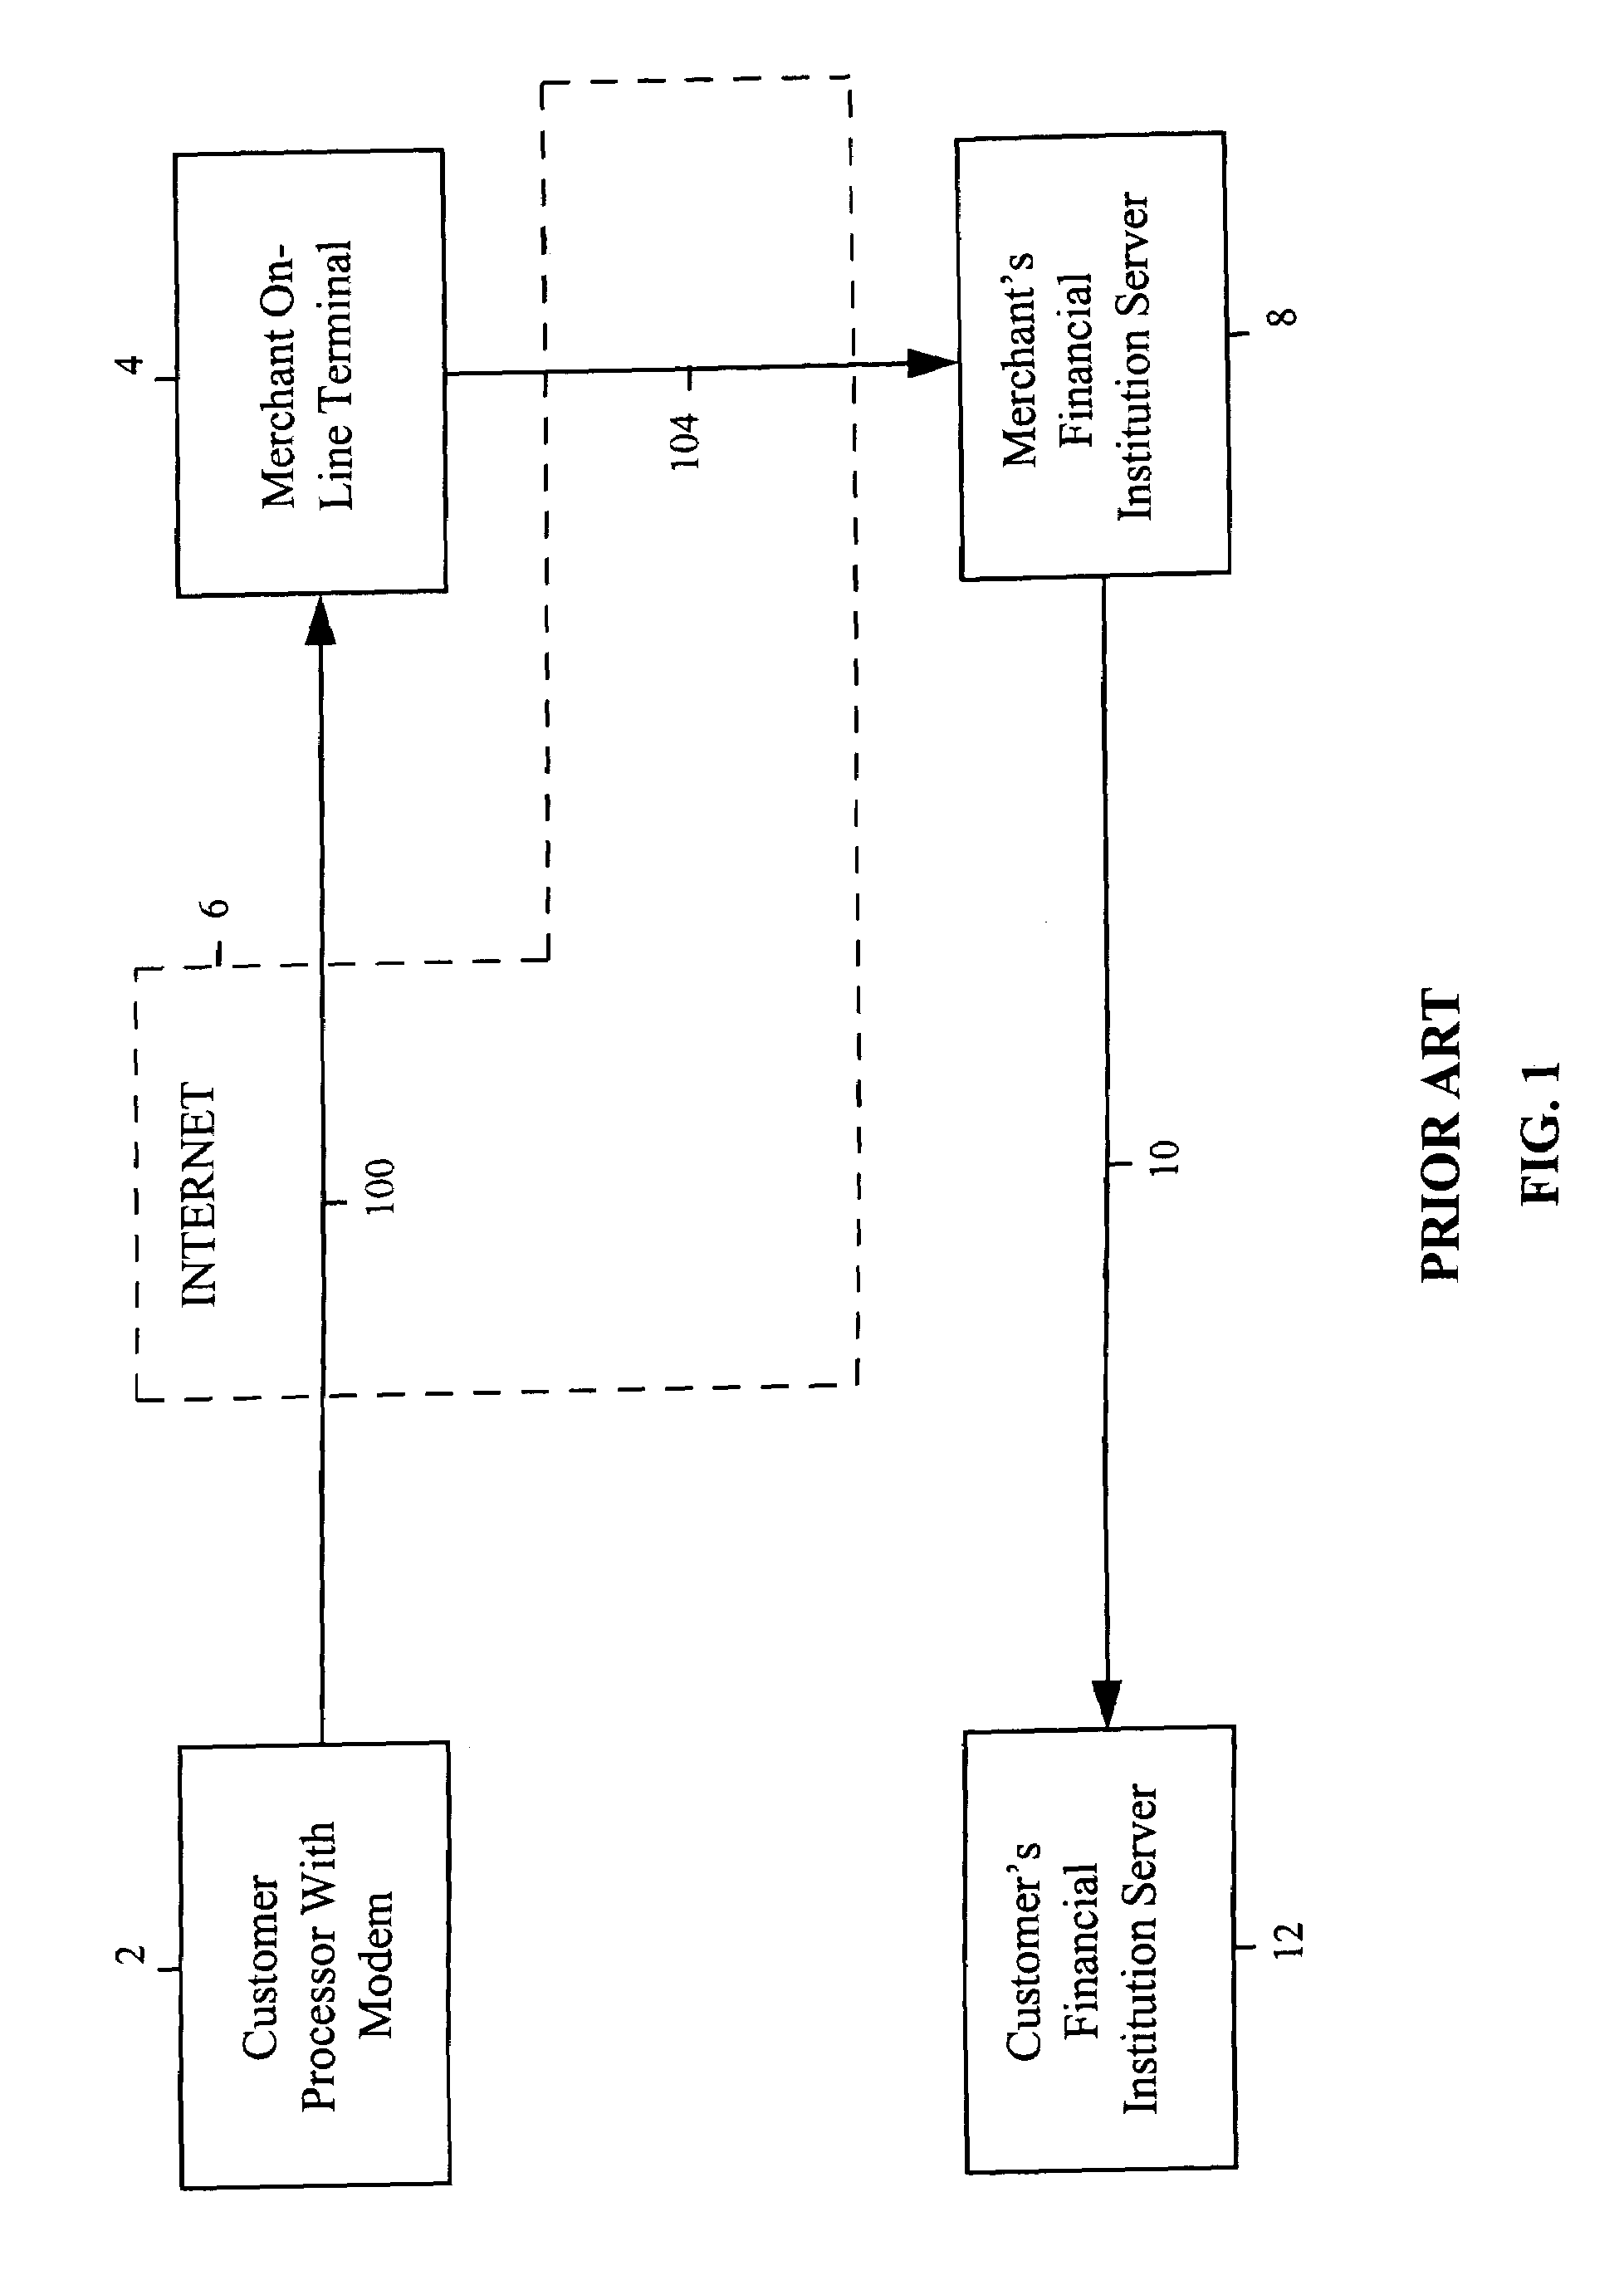 System and method for merchant function assumption of internet checking and savings account transactions